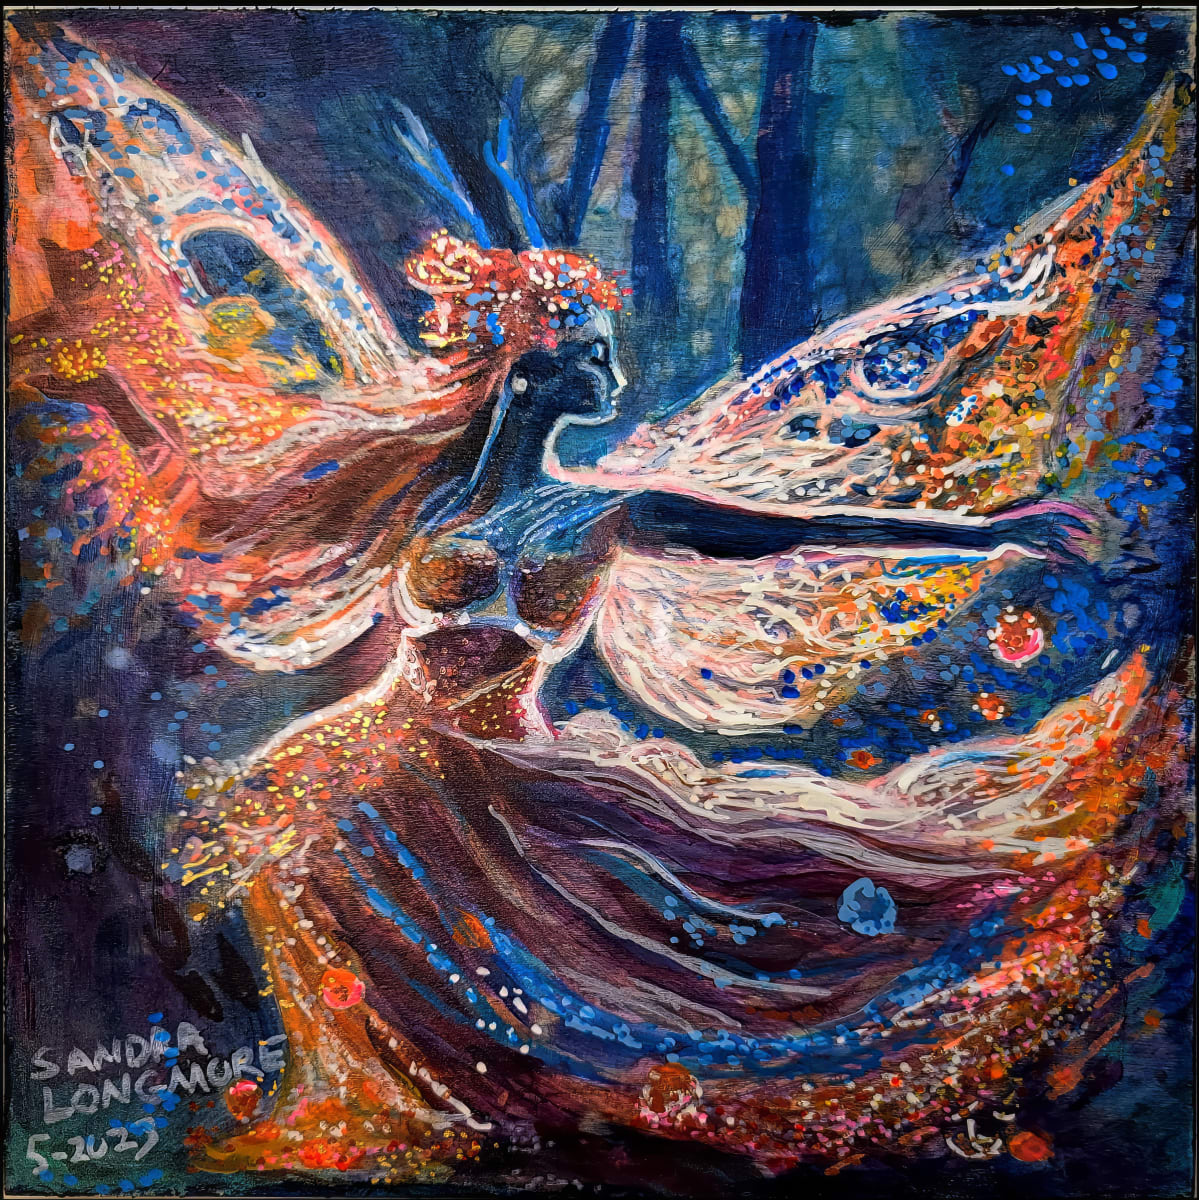 "Enchanted Forest Dance" by Sandra Longmore  Image: "Enchanted Forest Dance"